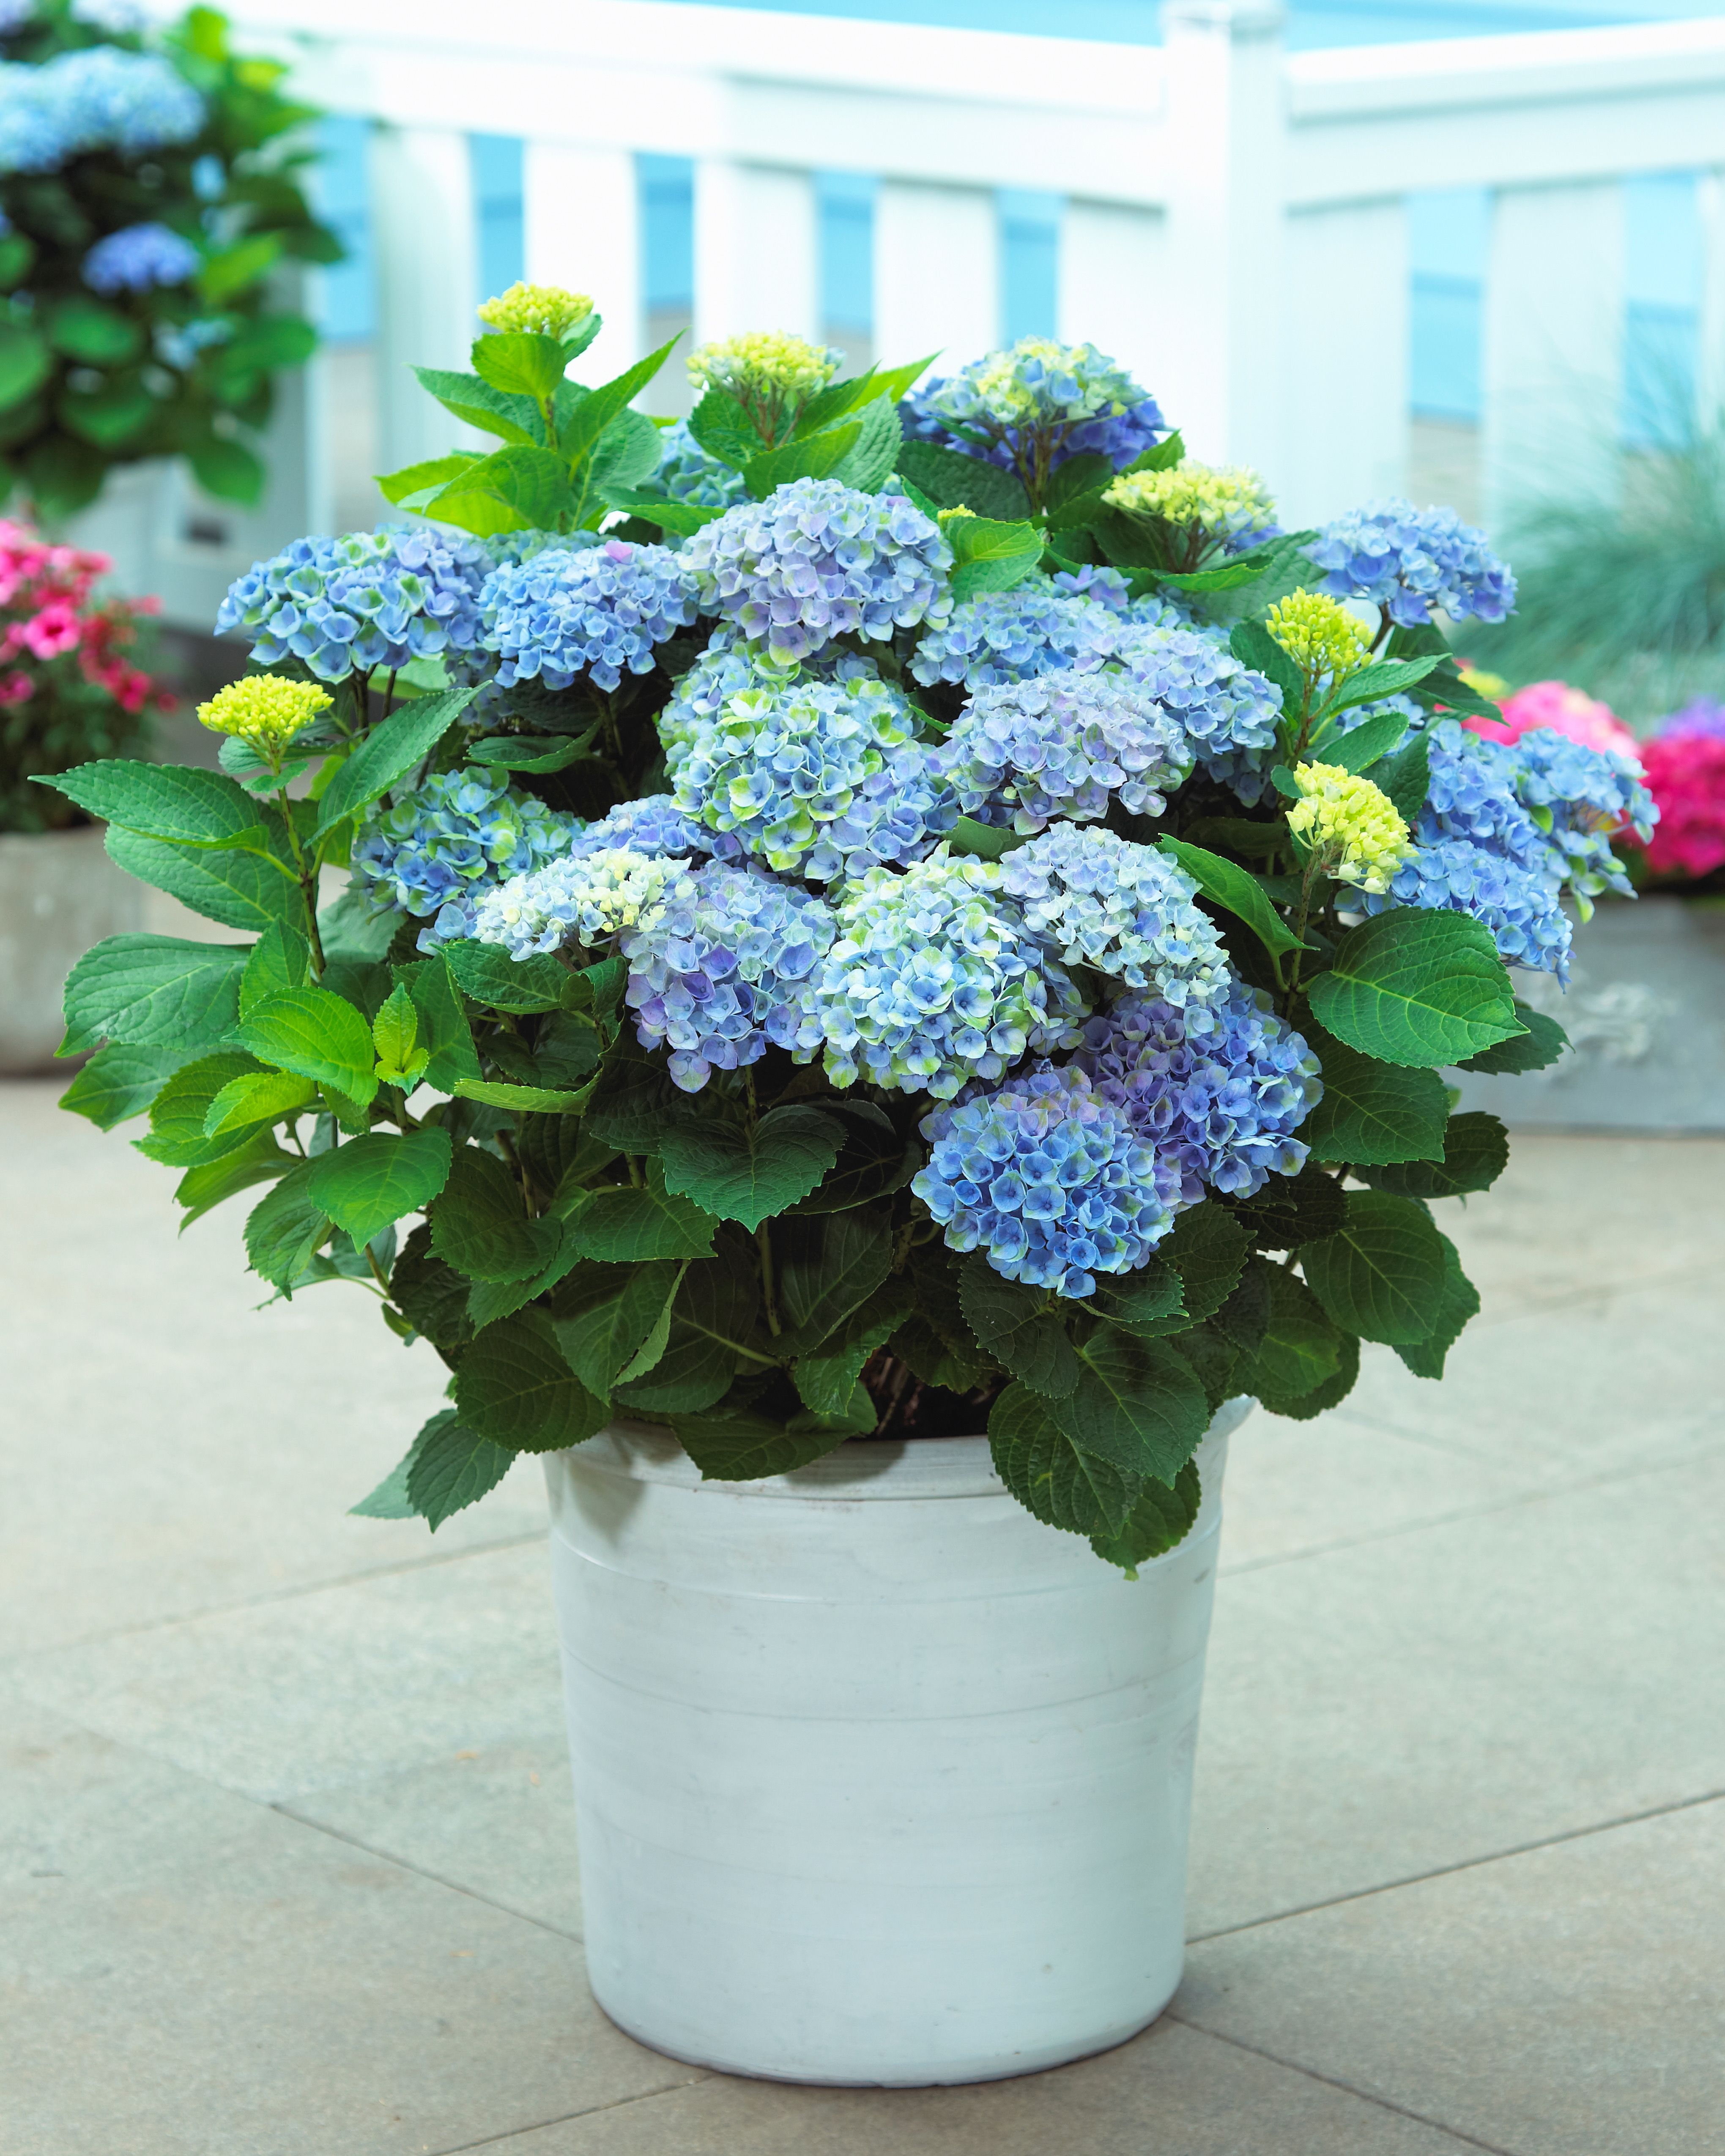 images/plants/hydrangea/hyd-magical-everlasting-revolution/hyd-magical-everlasting-revolution-0123.jpg